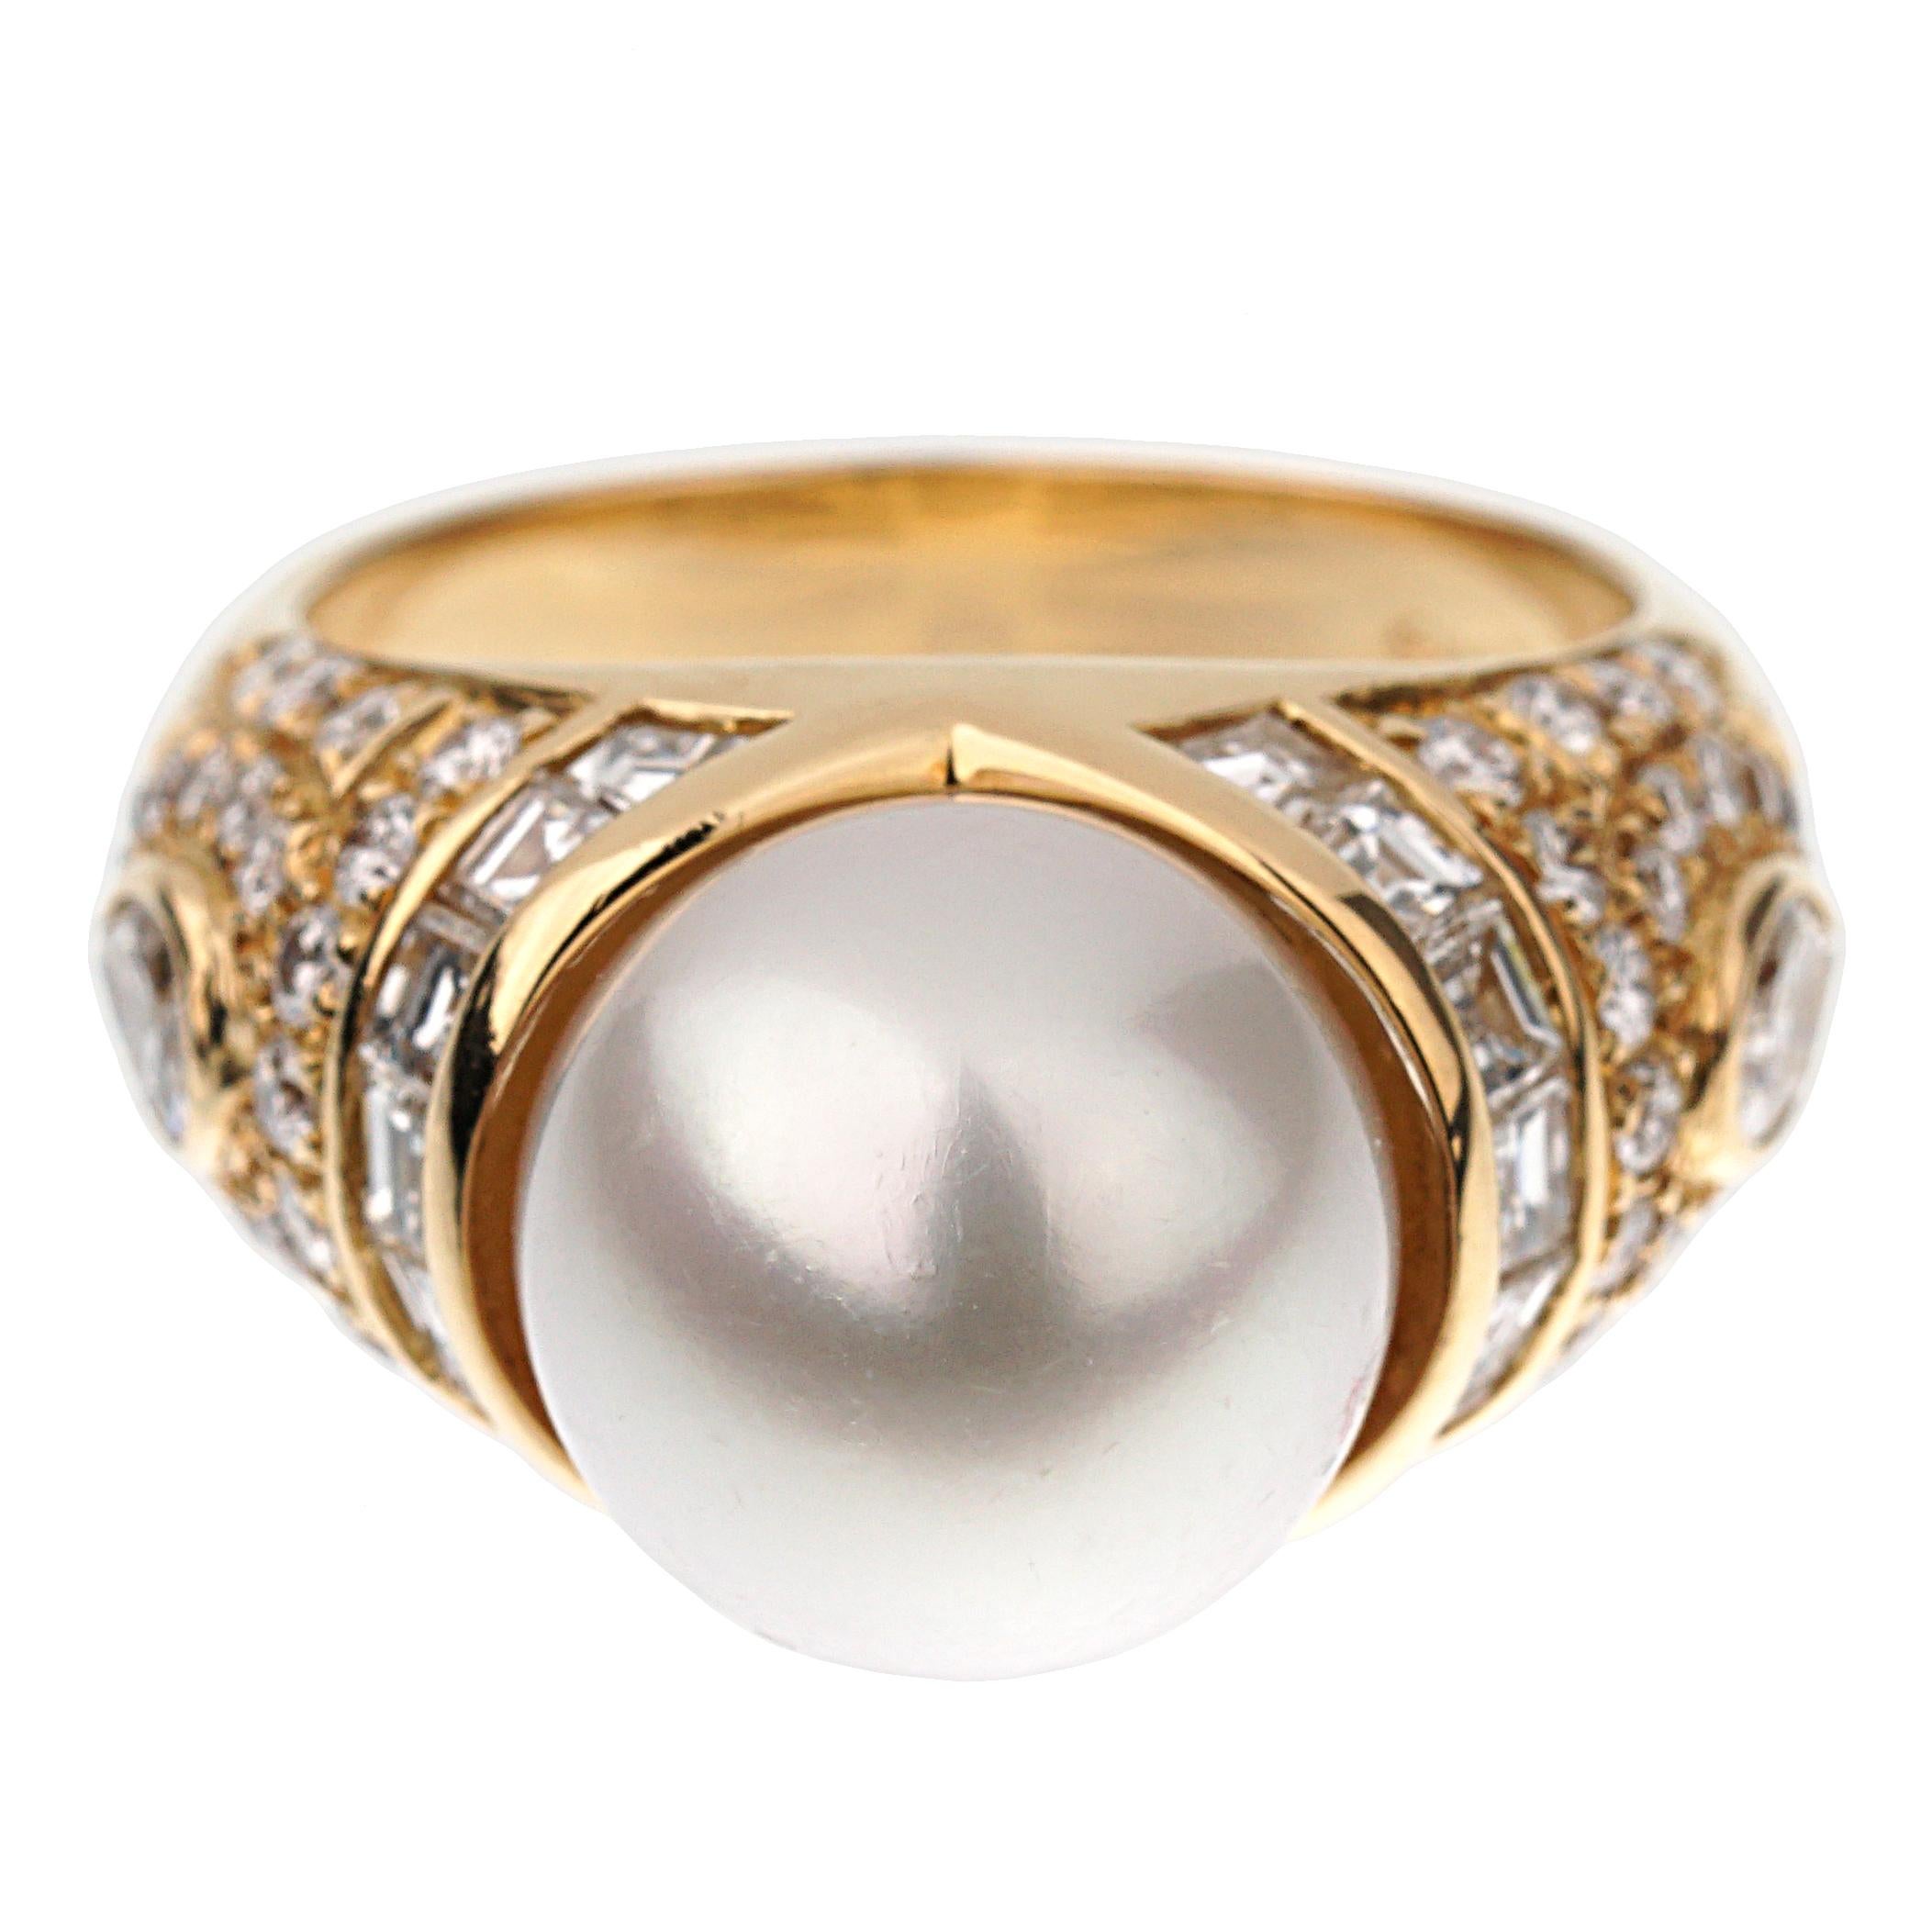 A fabulous Bvlgari ring showcasing a plethora of multiple shaped diamonds, set with round brilliant cut, pear, and carre cut diamonds. This ring showcases 1.25ct appx, and is topped with an 11mm pearl. The ring measures a size 5 3/4 and can be